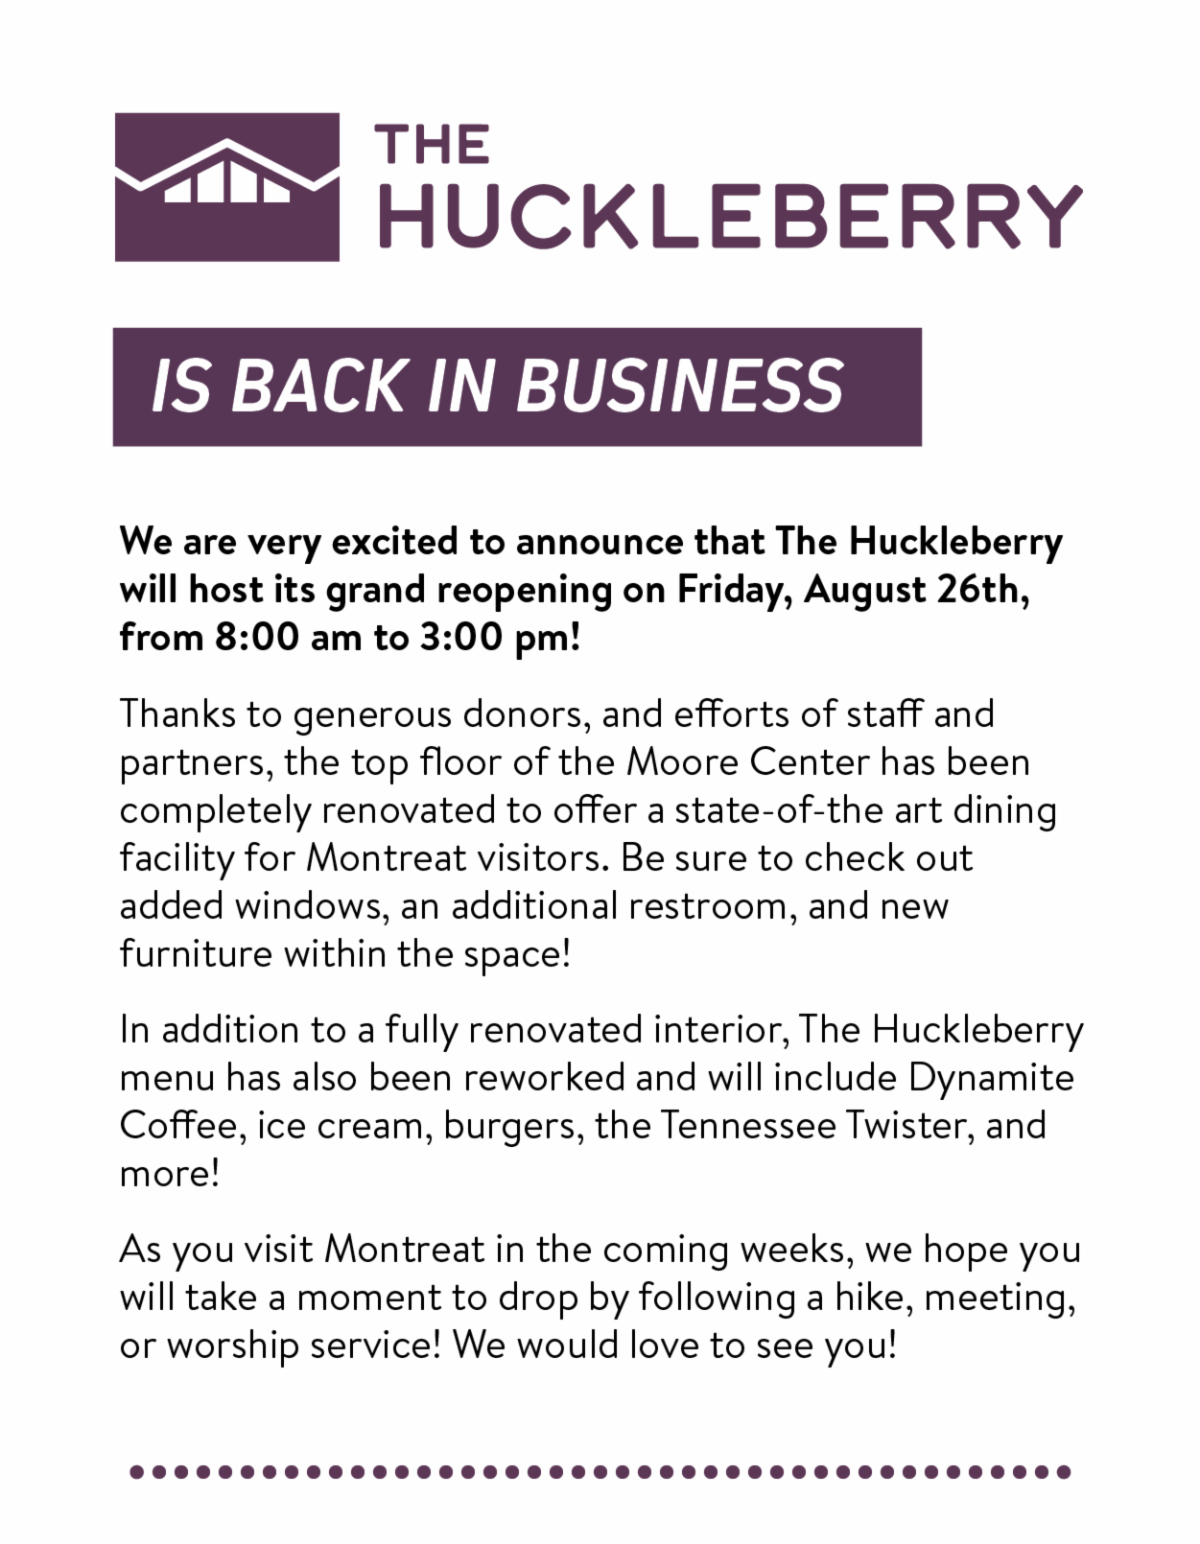 The Huckleberry is back in business! - We are very excited to announce that The Huckleberry will host its grand reopening on Friday, August 26th, from 8:00 am to 3:00 pm!  Thanks to generous donors, and efforts of staff and partners, the top floor of the Moore Center has been completely renovated to offer a state-of-the art dining facility for Montreat visitors. Be sure to check out added windows, an additional restroom, and new furniture within the space! In addition to a fully renovated interior, The Huckleberry menu has also been reworked and will include Dynamite Coffee, ice cream, burgers, the Tennessee Twister, and more! As you visit Montreat in the coming weeks, we hope you will take a moment to drop by following a hike, meeting, or worship service! We would love to see you!